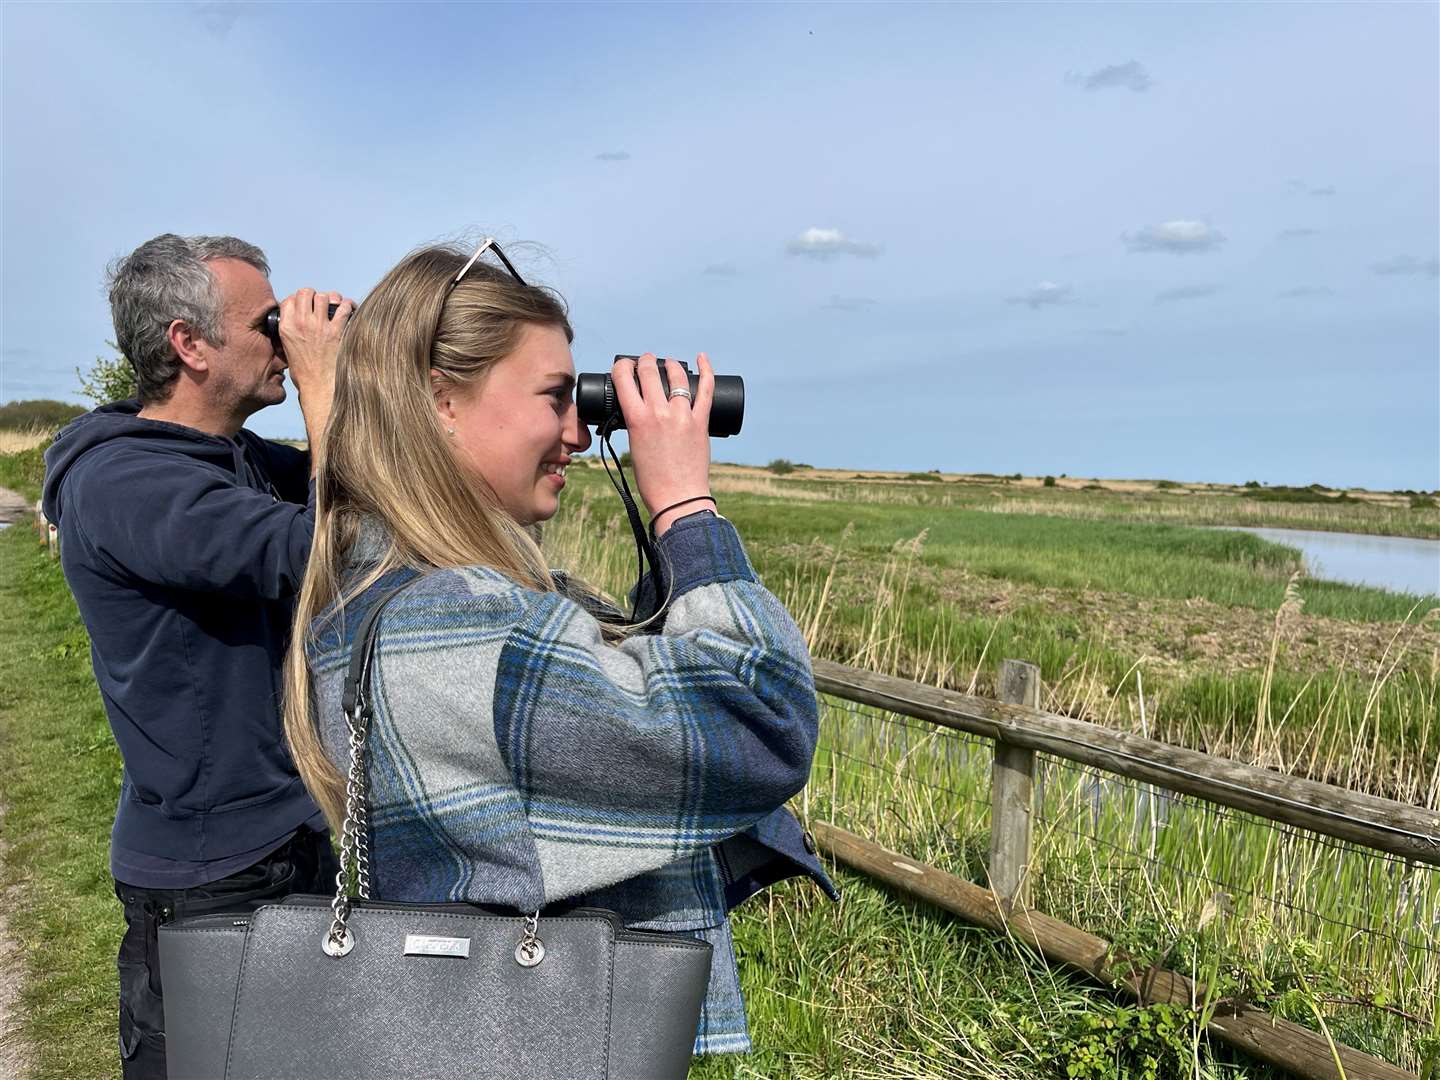 Binoculars are crucial to get the most out of your visit